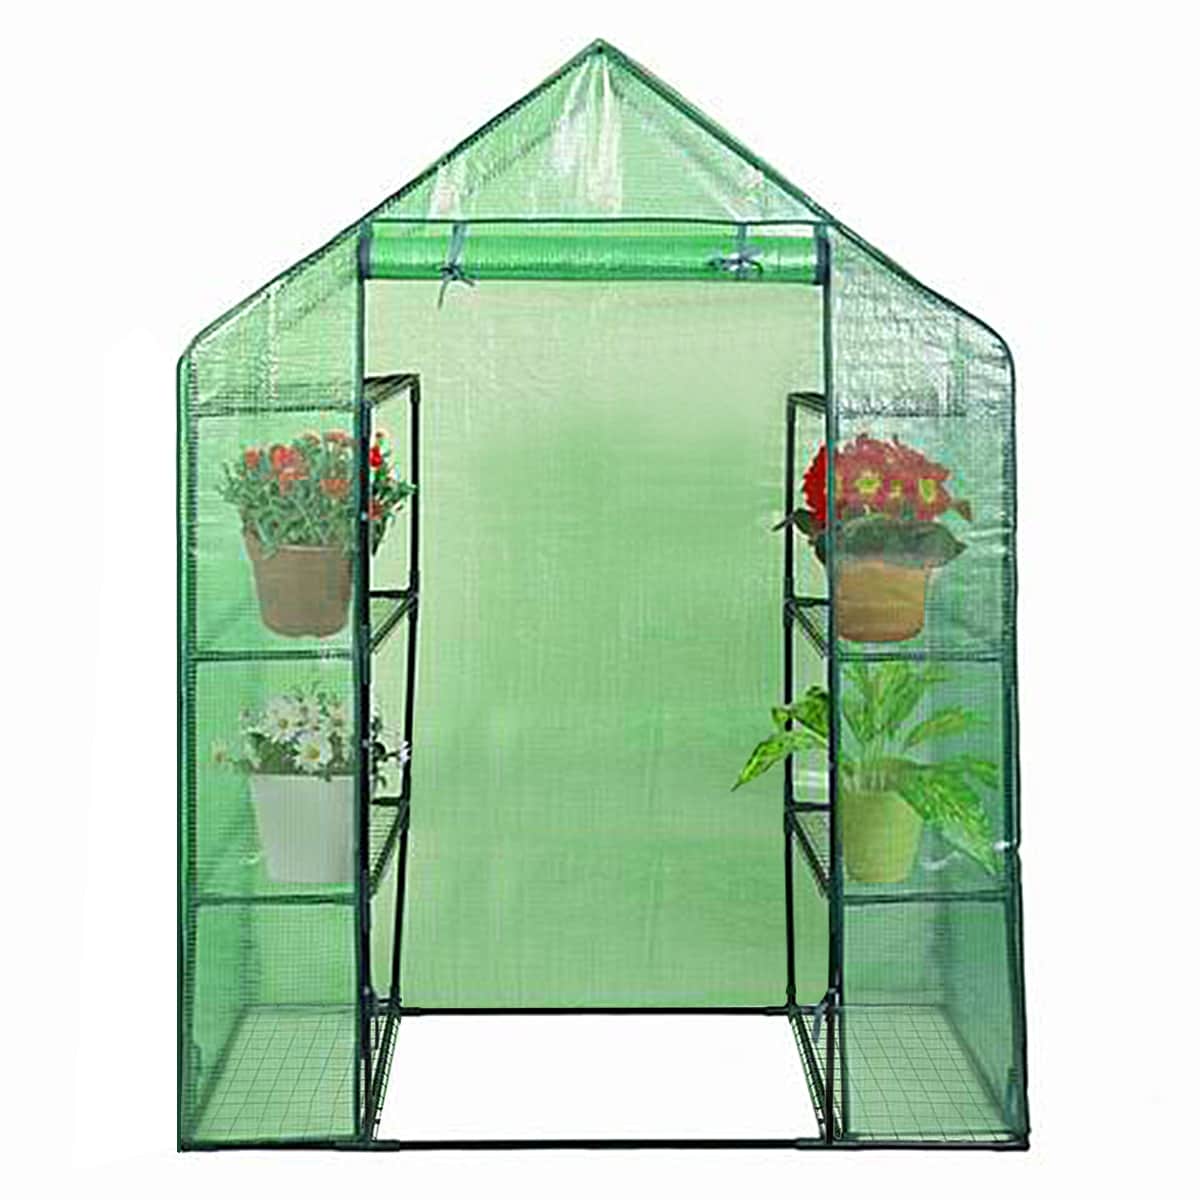 OUTDOOR GARDEN 5 TIER GREENHOUSE REPLACEMENT COVER GROW PLANTS PROTECTION NEW 